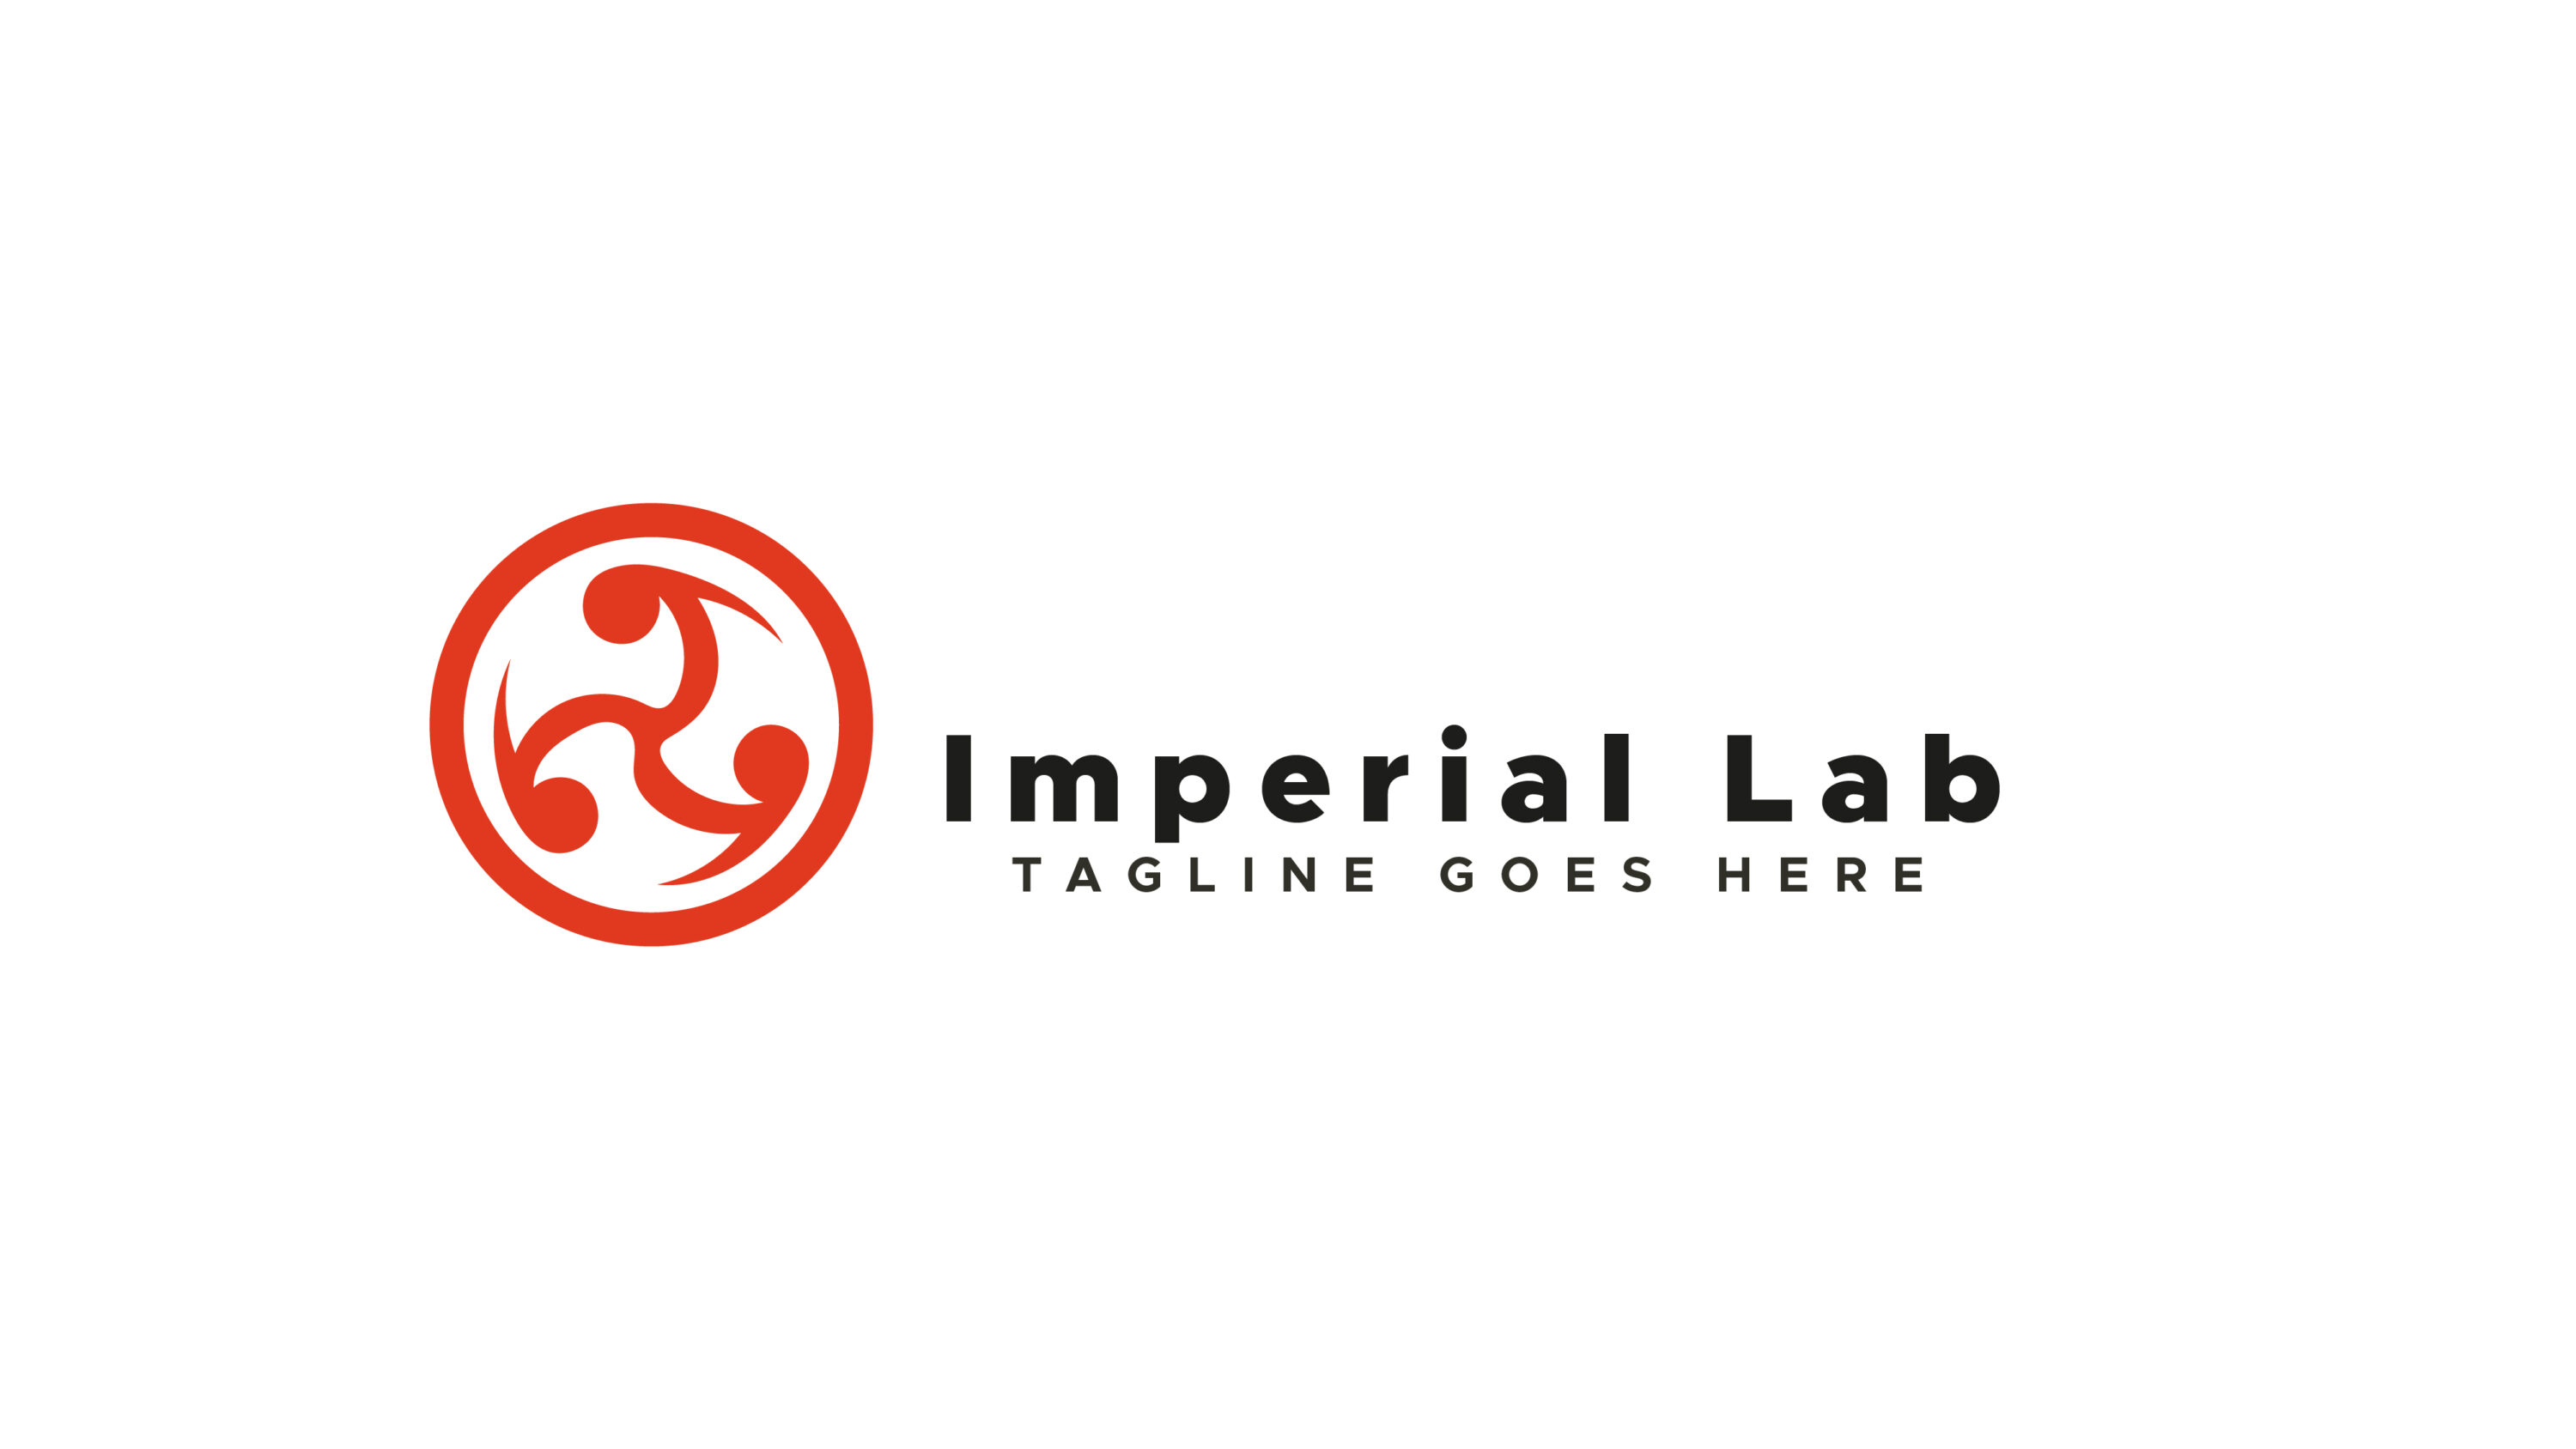 Imperial Lab Professional Logo Design Template Only 12$ facebook image.